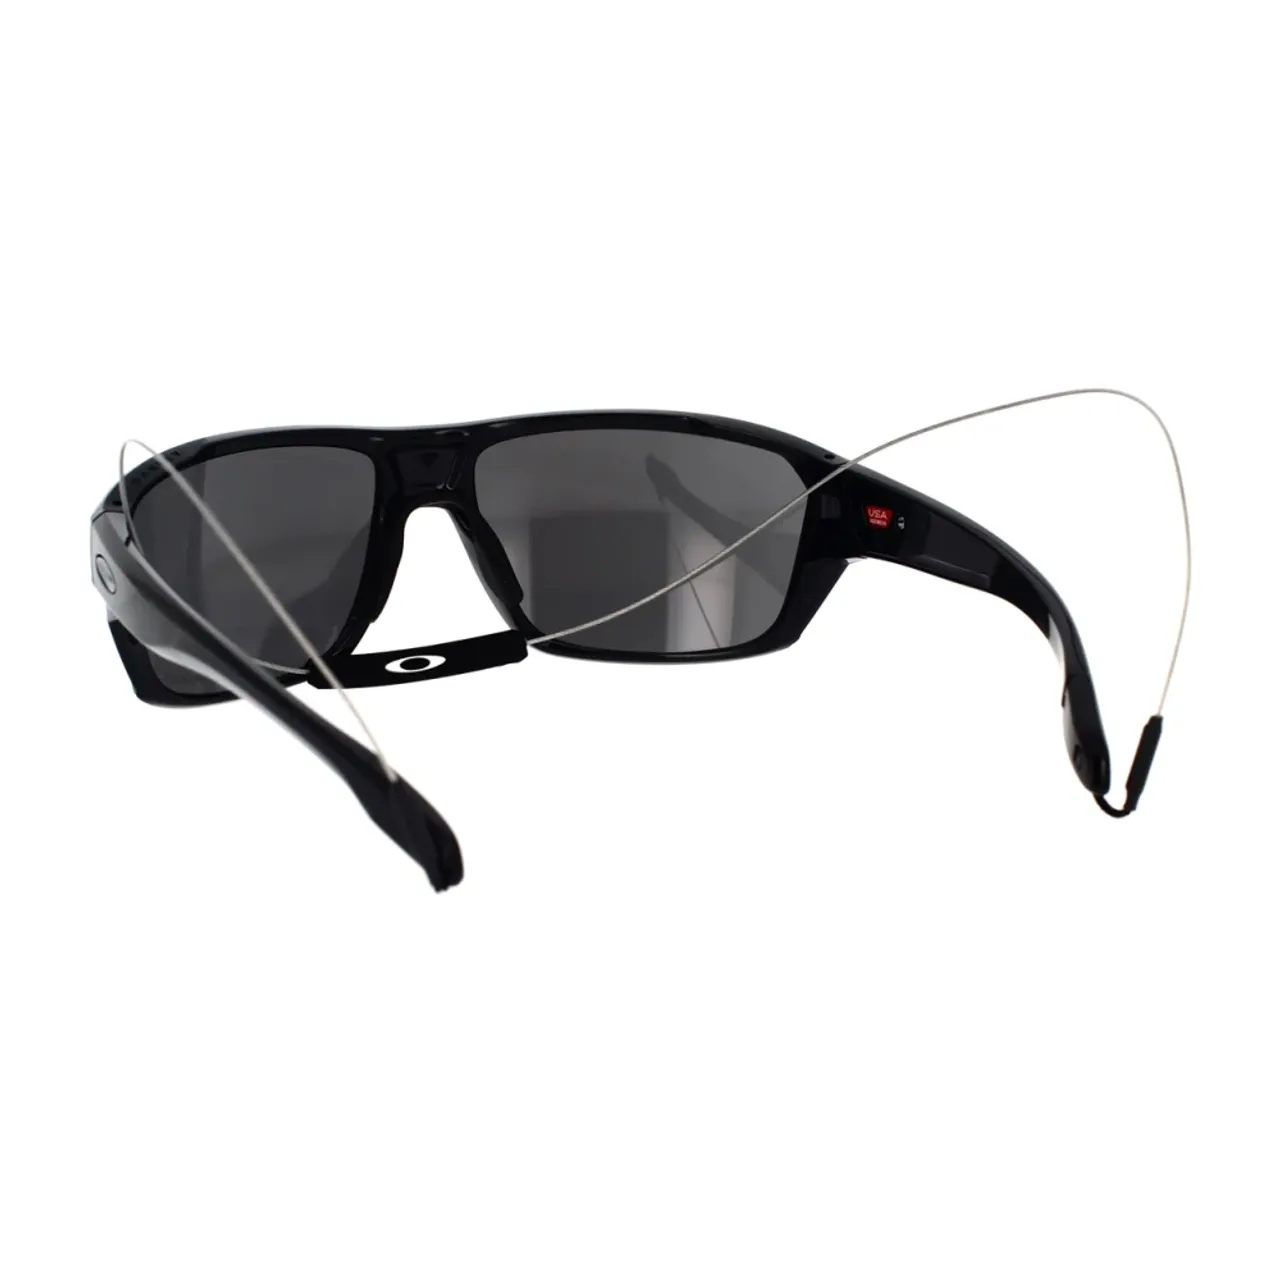 Oakley , Sporty Sunglasses with Enhanced Vision ,Black unisex, Sizes: 64 MM